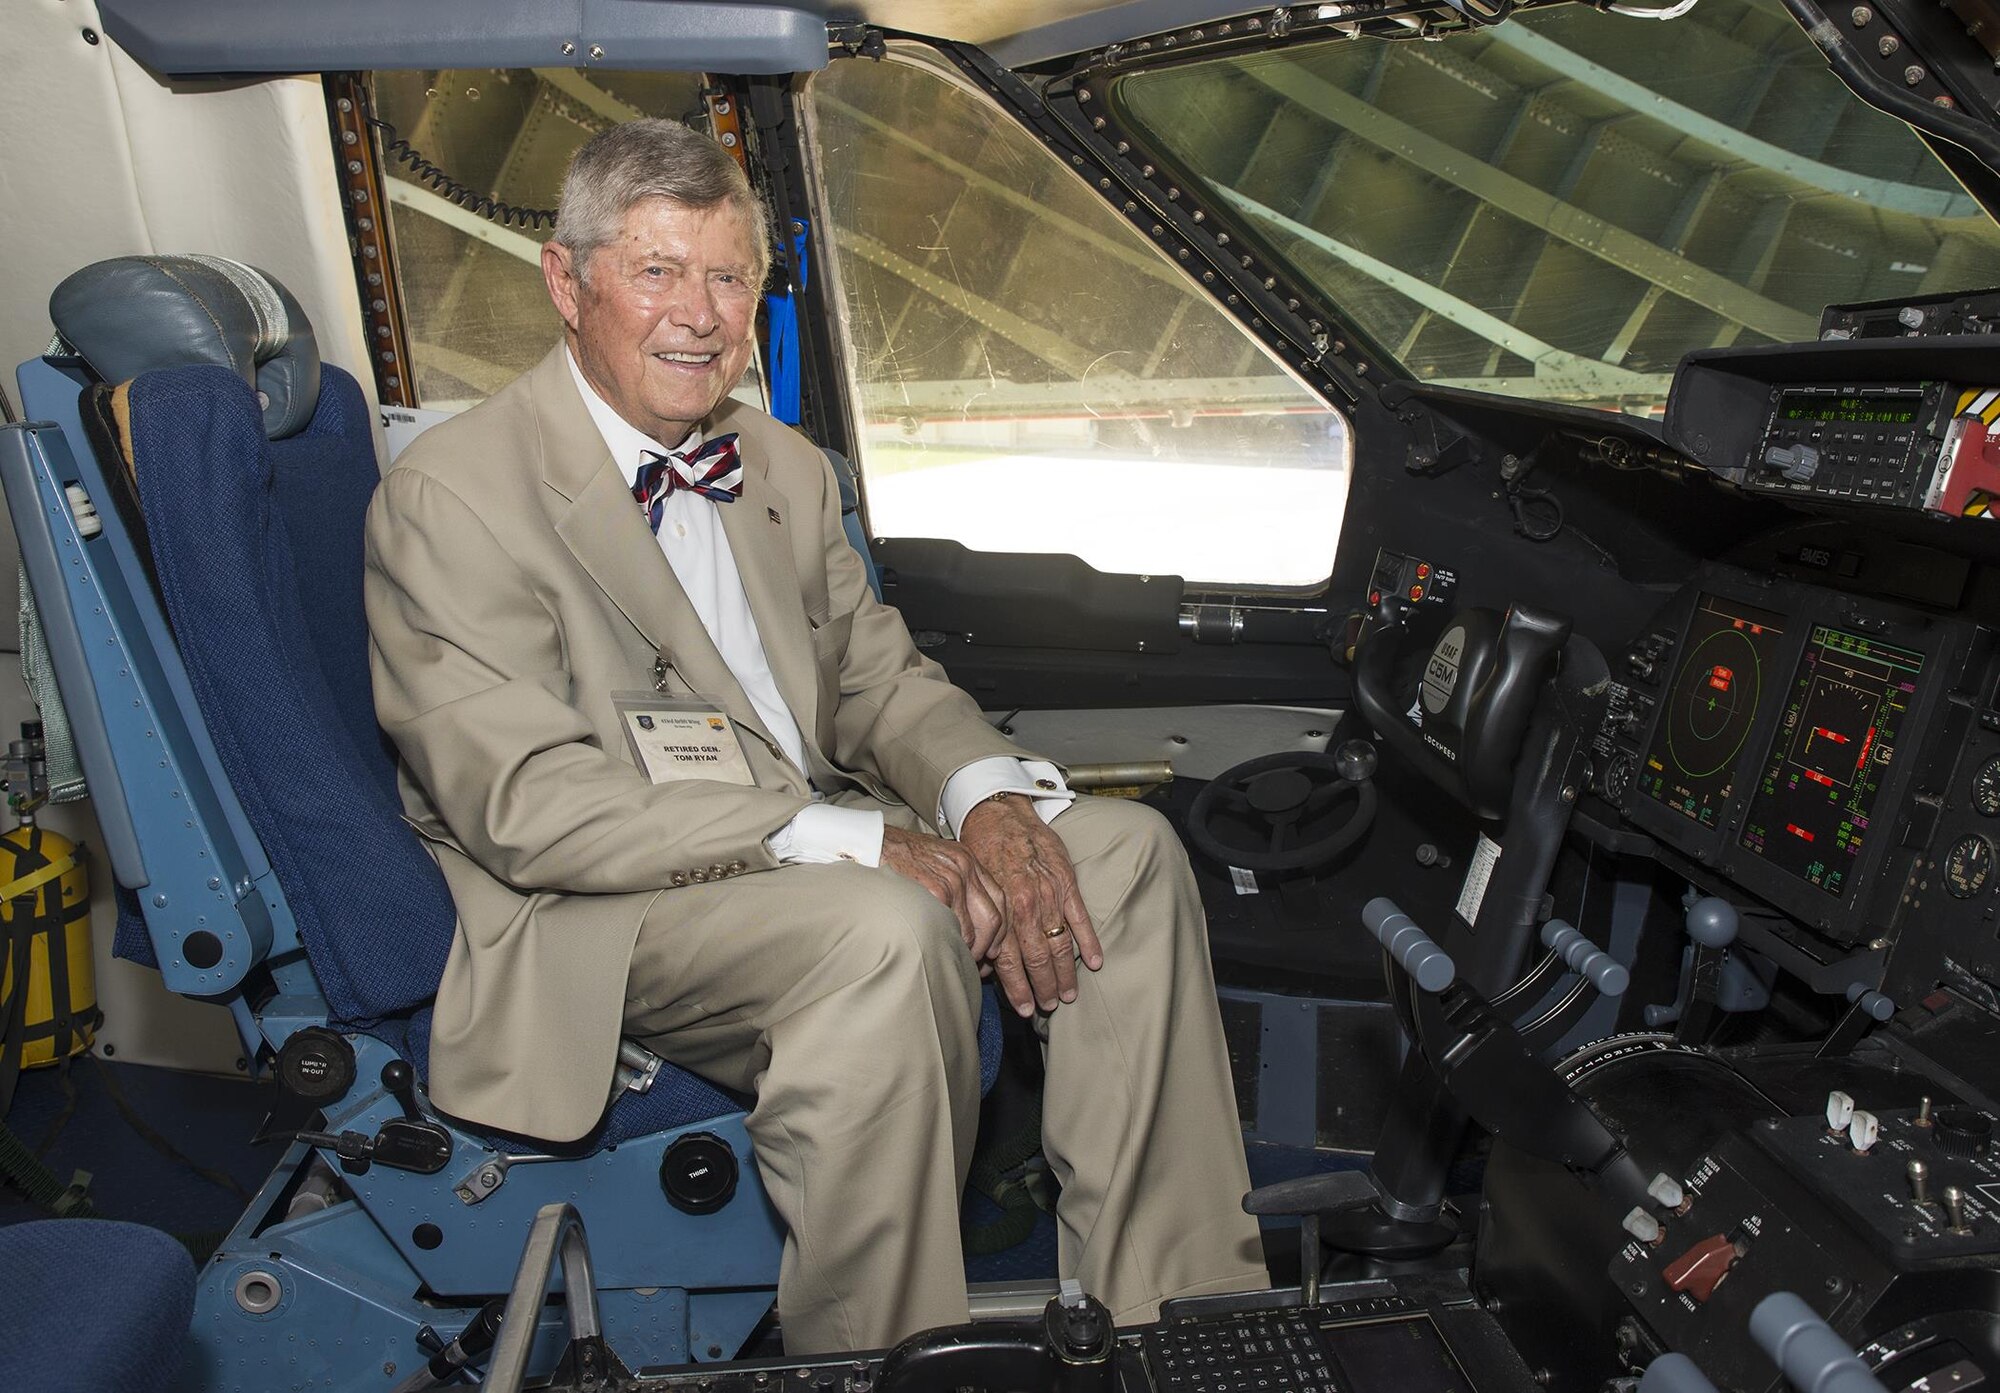 Retired Gen. Thomas M. Ryan, former Military Airlift Command commander, poses for a photo in the cockpit of the new C-5M Super Galaxy aircraft, bestowed "The City of San Antonio" June 17, 2016 at Joint Base San Antonio-Lackland, Texas. Ryan piloted the Alamo Wing's first C-5A Galaxy aircraft from Norton Air Force Base, California, to Kelly Air Force Base, Texas, on Nov. 30, 1984. The wing's first C-5A Galaxy of 32 years ago was also bestowed "The City of San Antonio," in a similar ceremony.(U.S. Air Force photo by Benjamin Faske) 